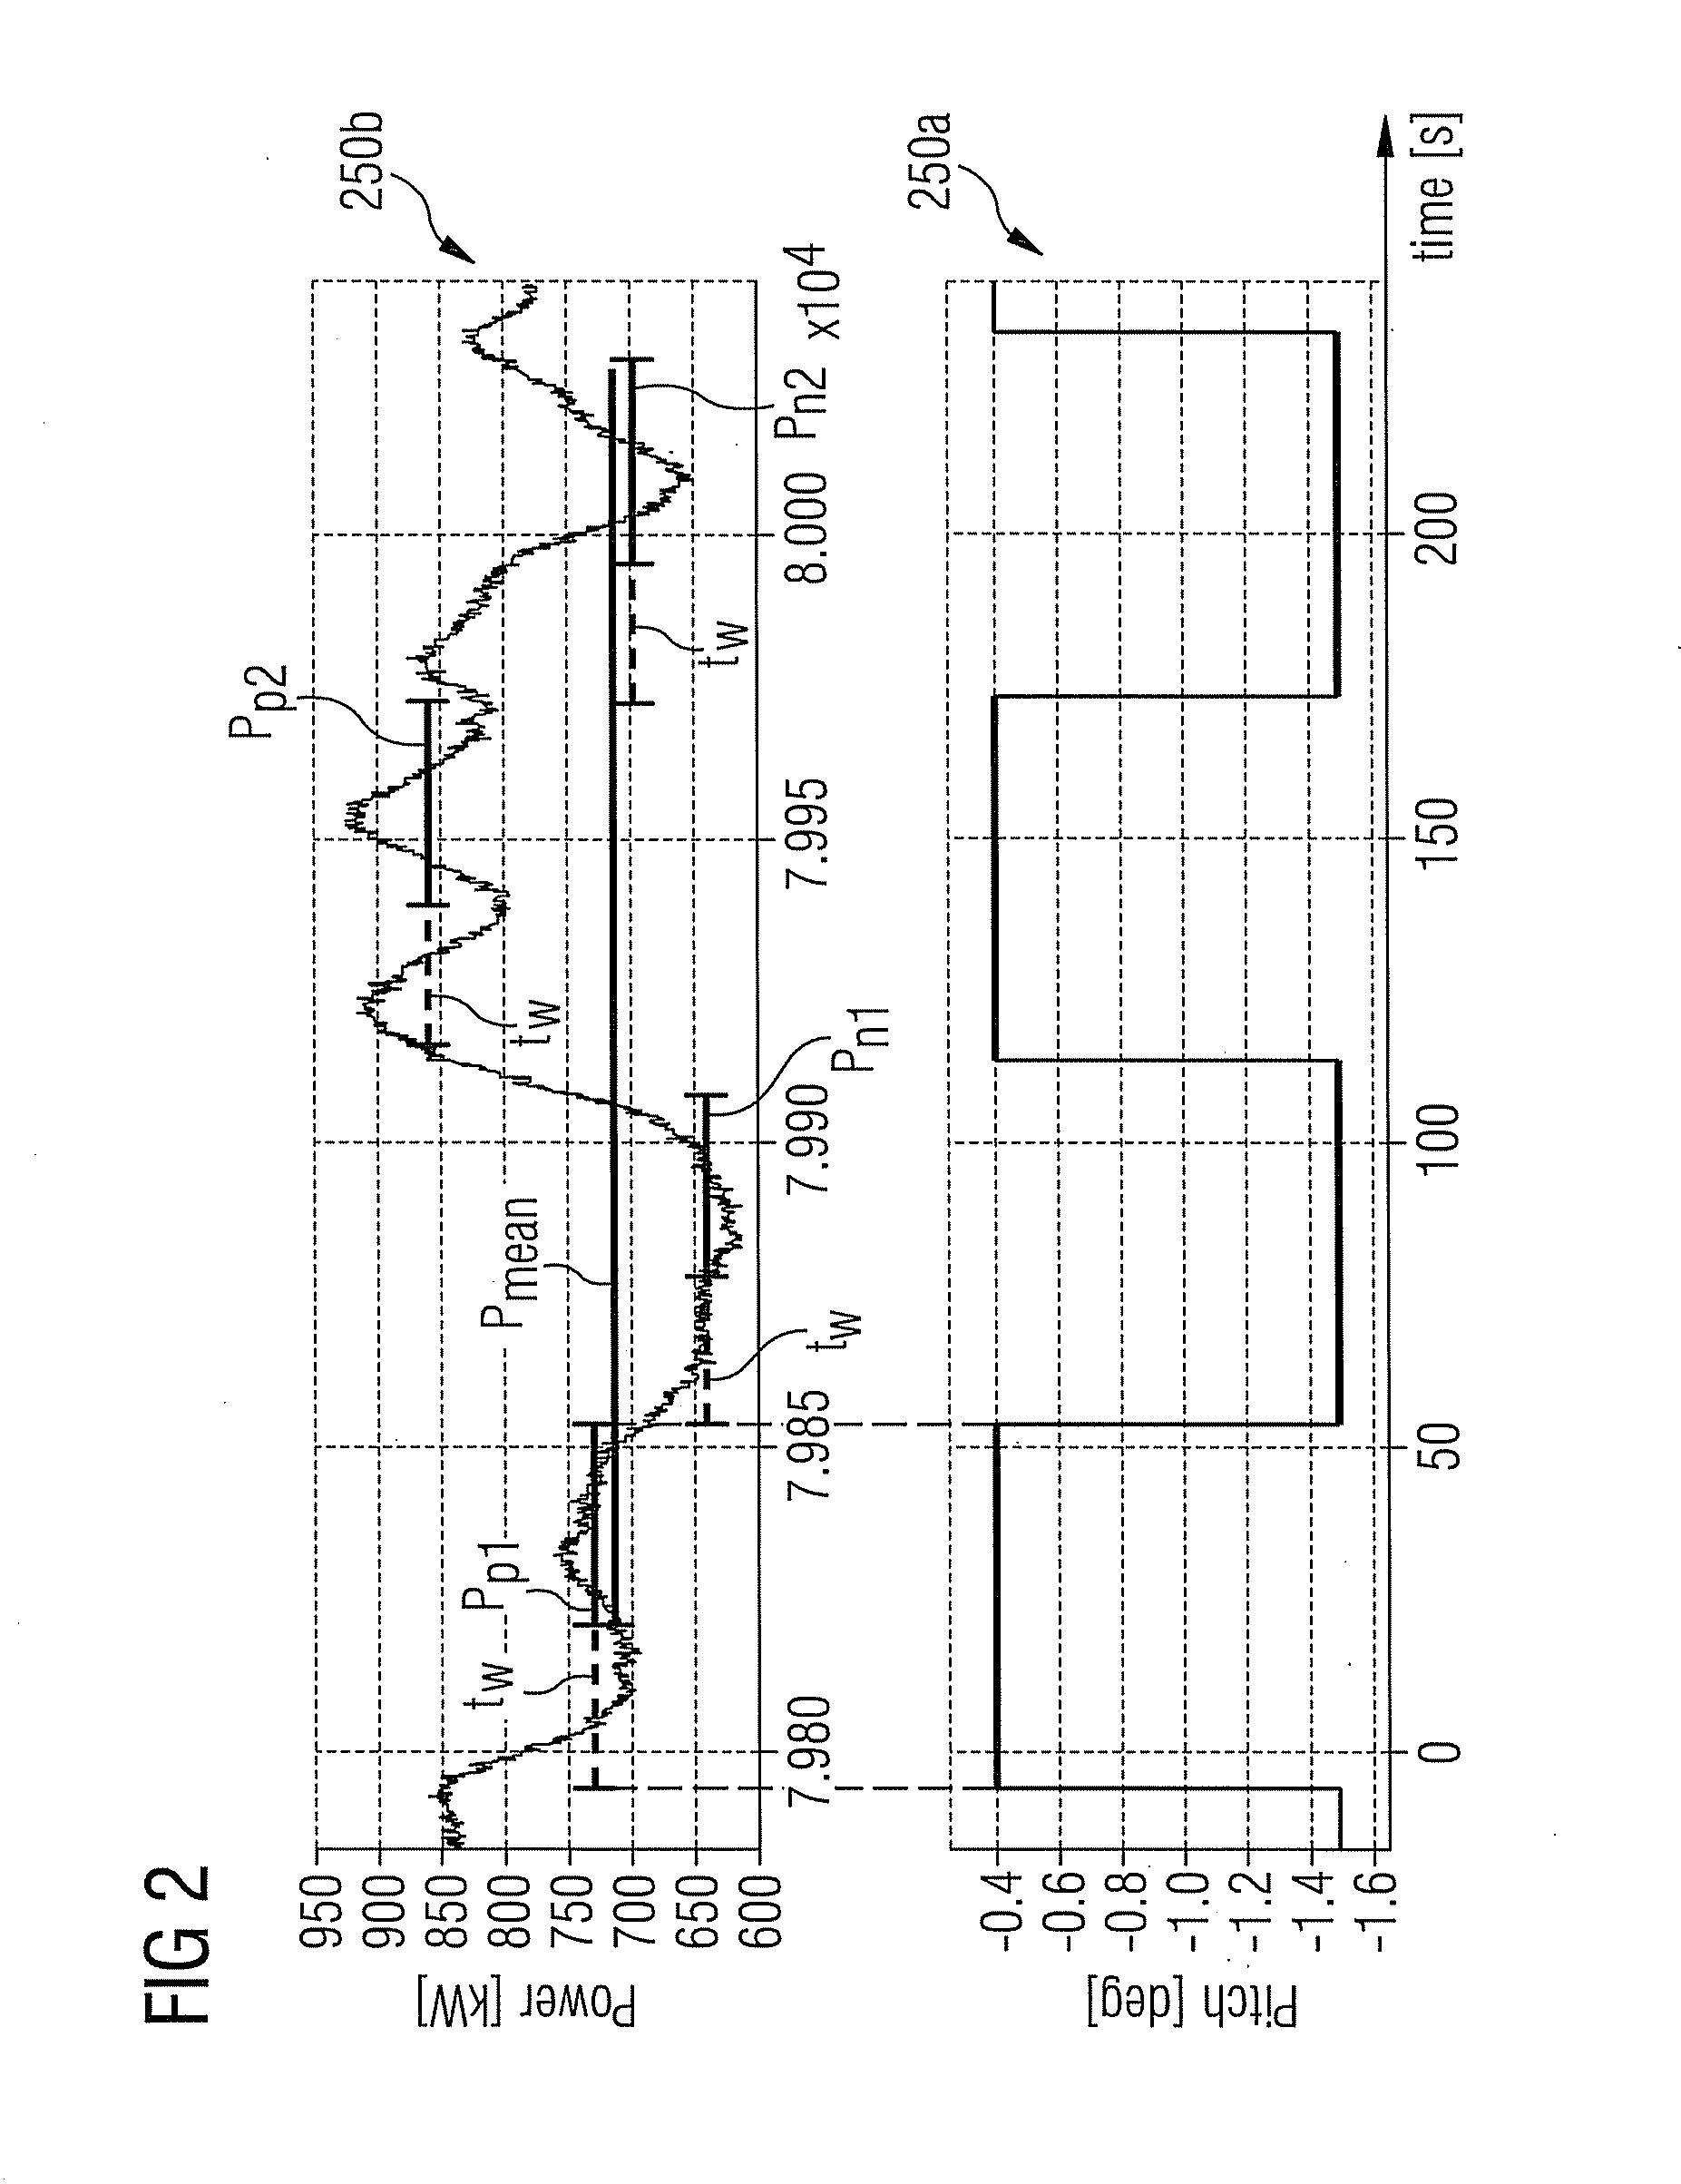 Adaptive adjustment of the blade pitch angle of a wind turbine